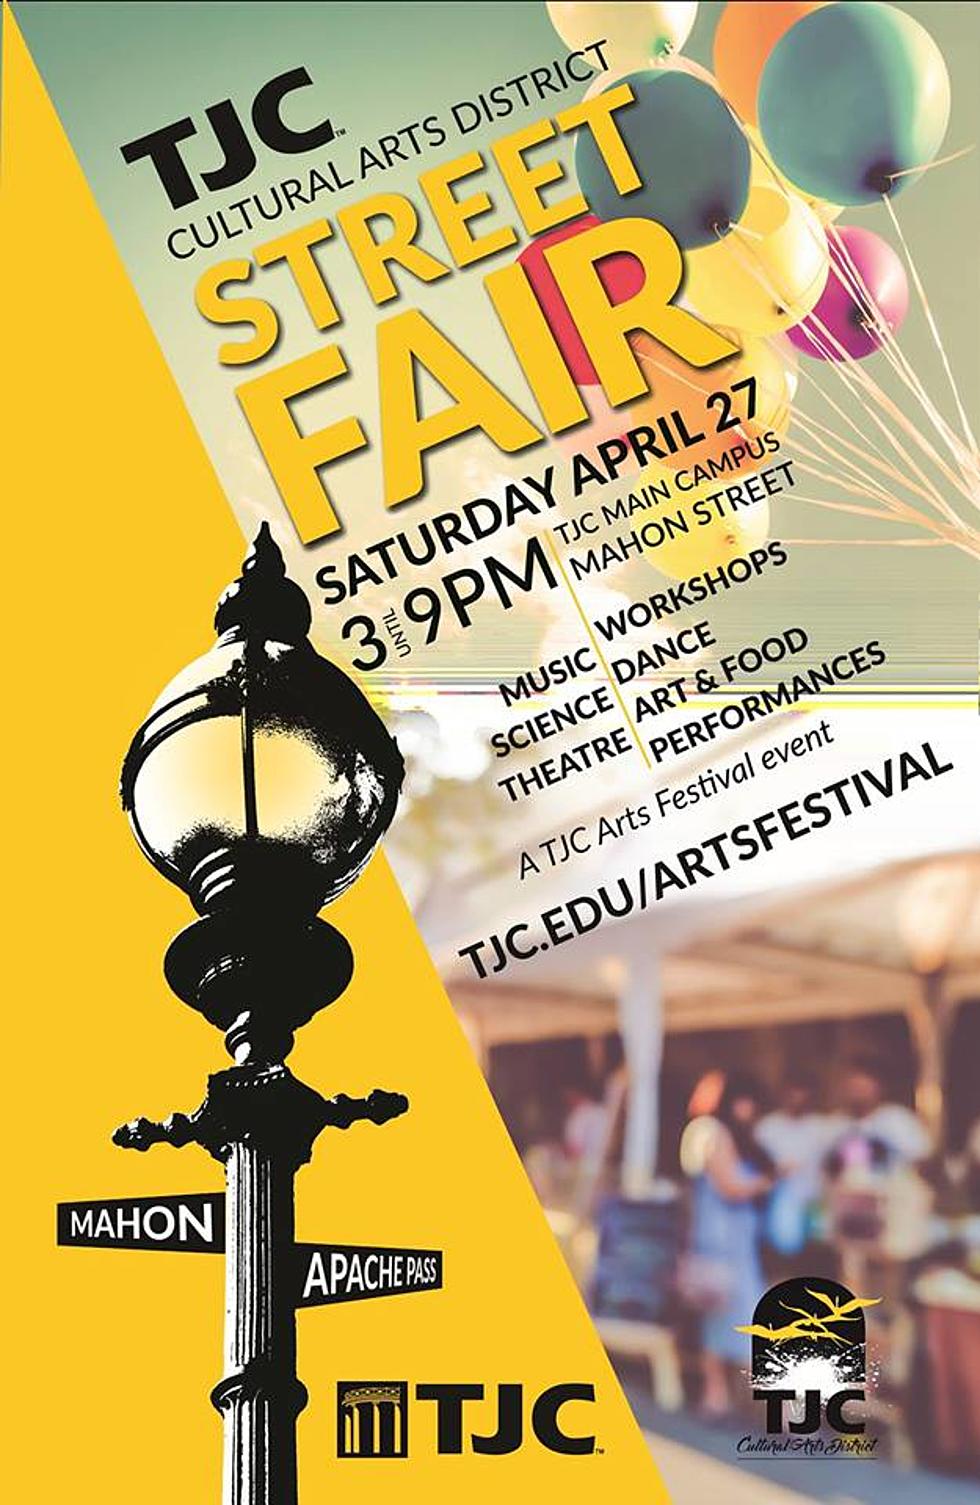 TJC&#8217;s Street Fair Features Music, Workshops, Food, And More